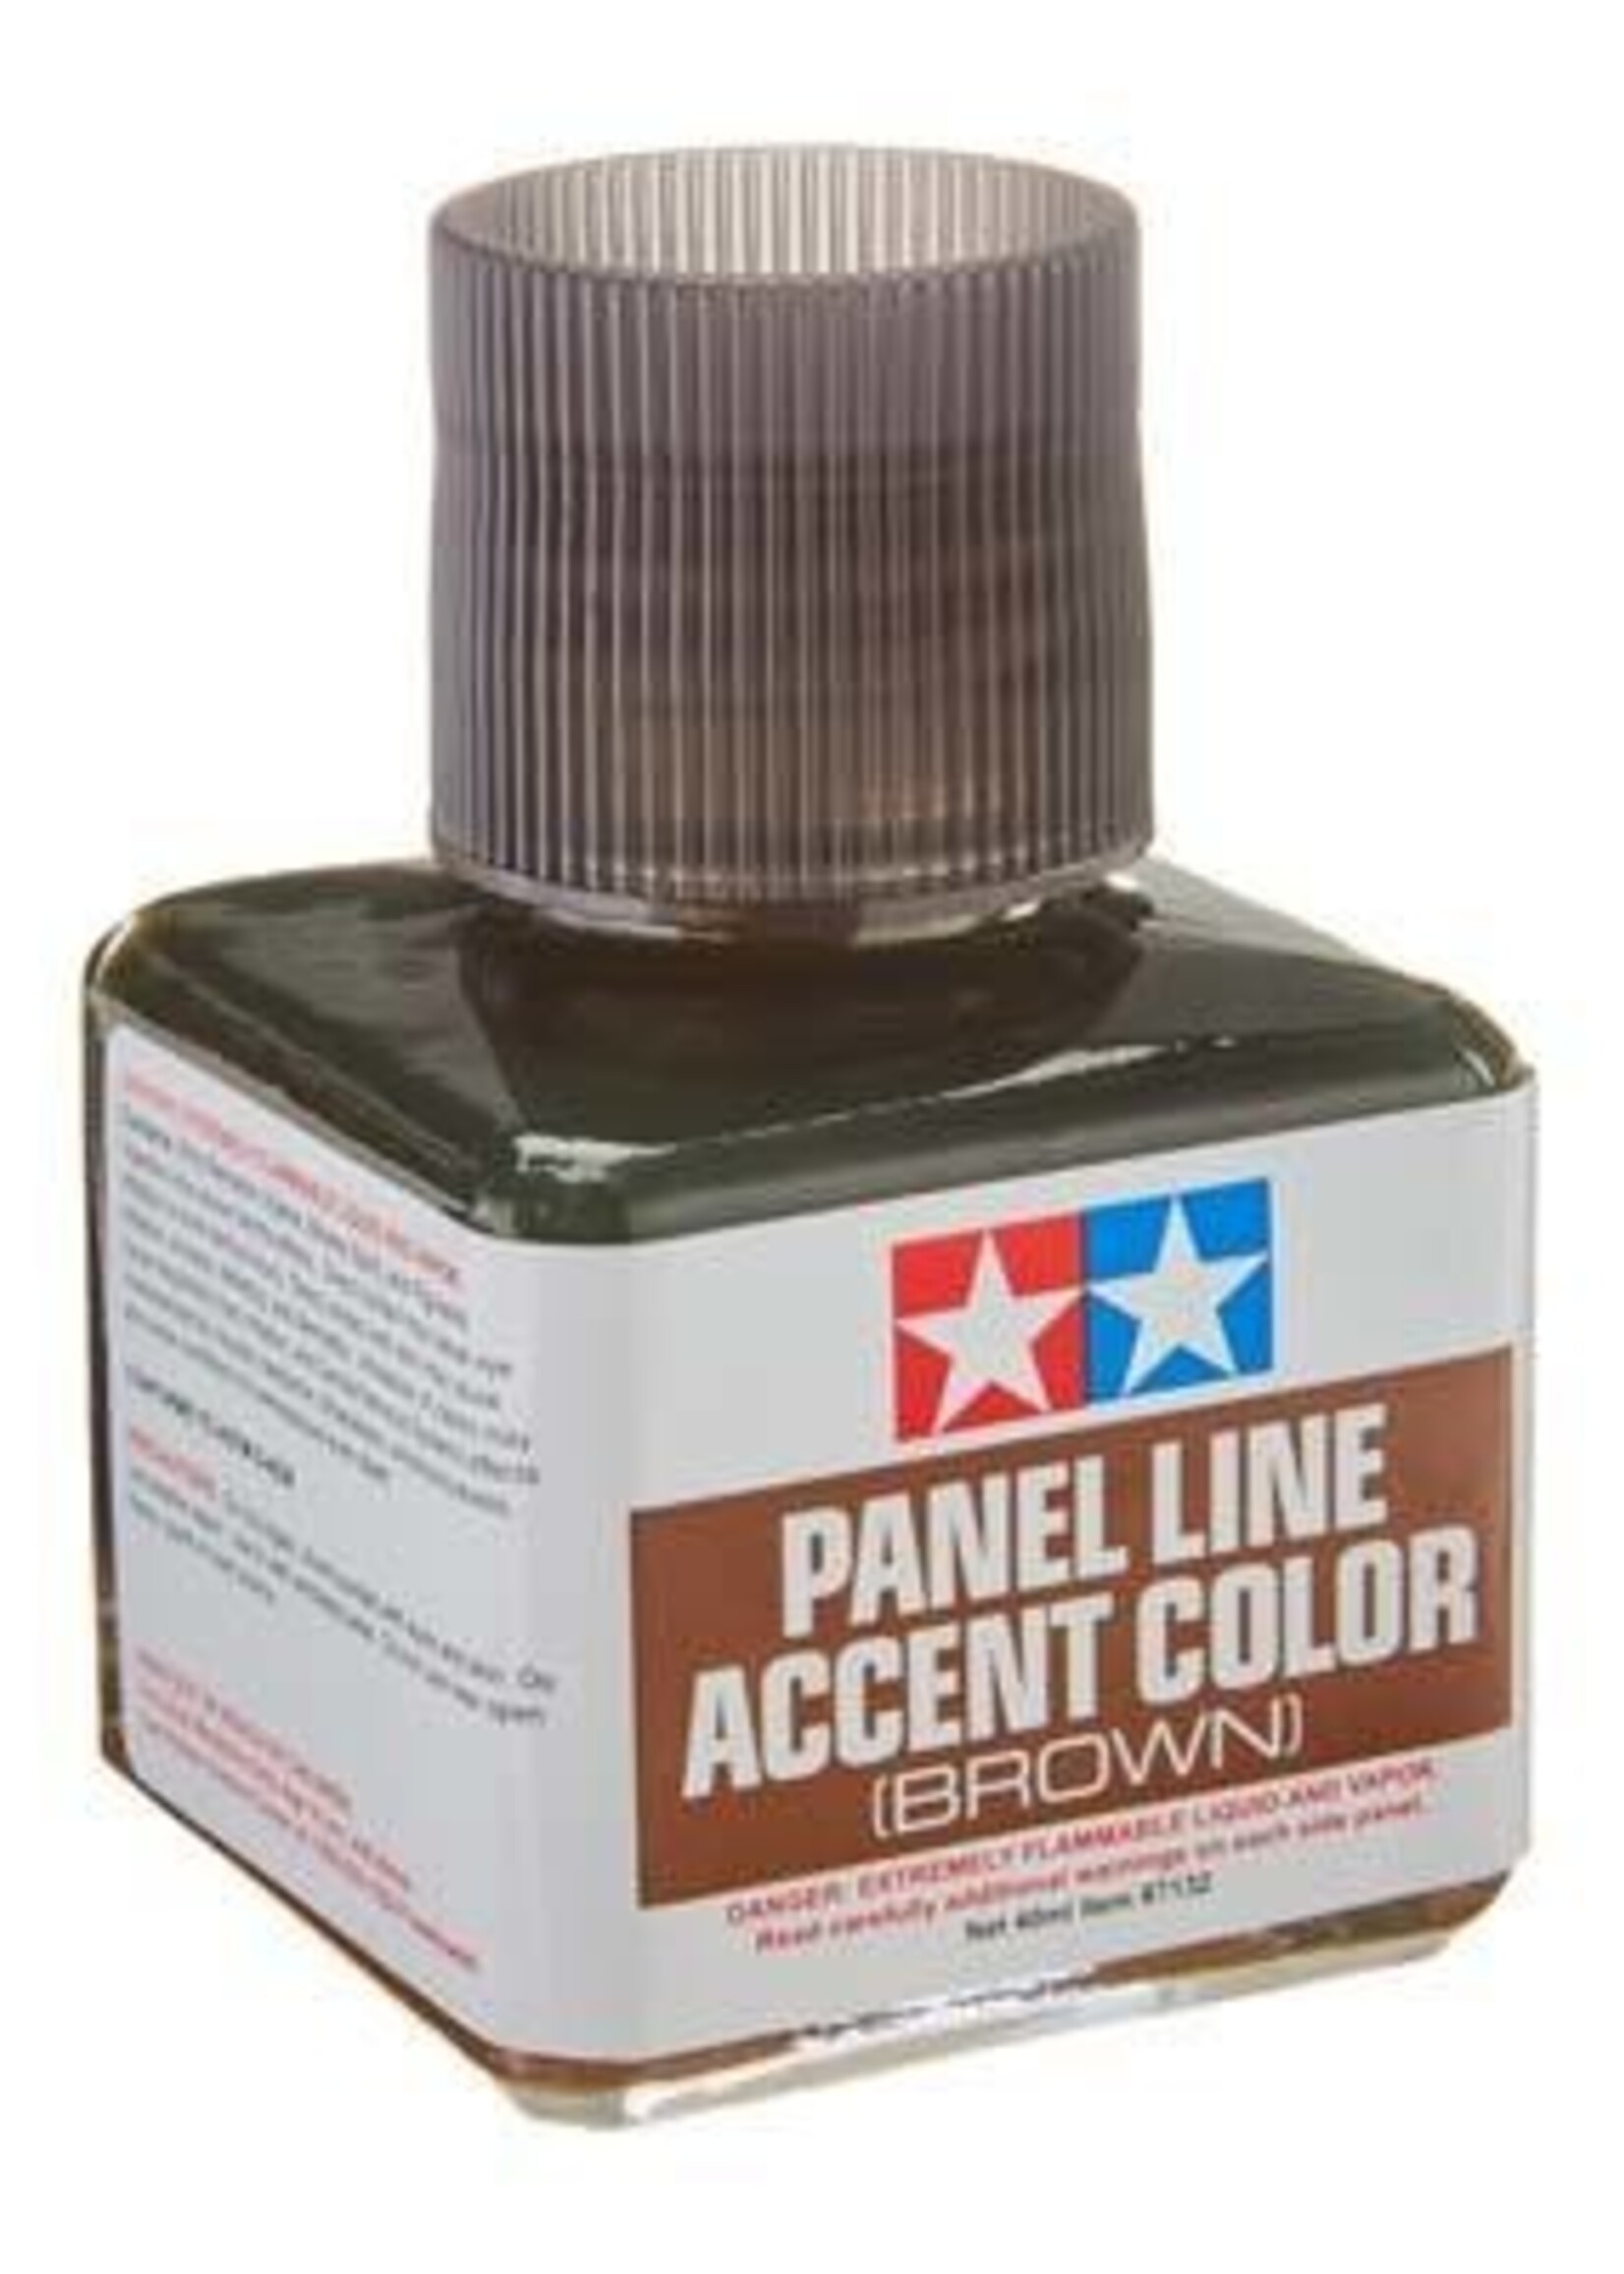 87132 Panel Line Accent Color Brown (Wash) - M R S Hobby Shop